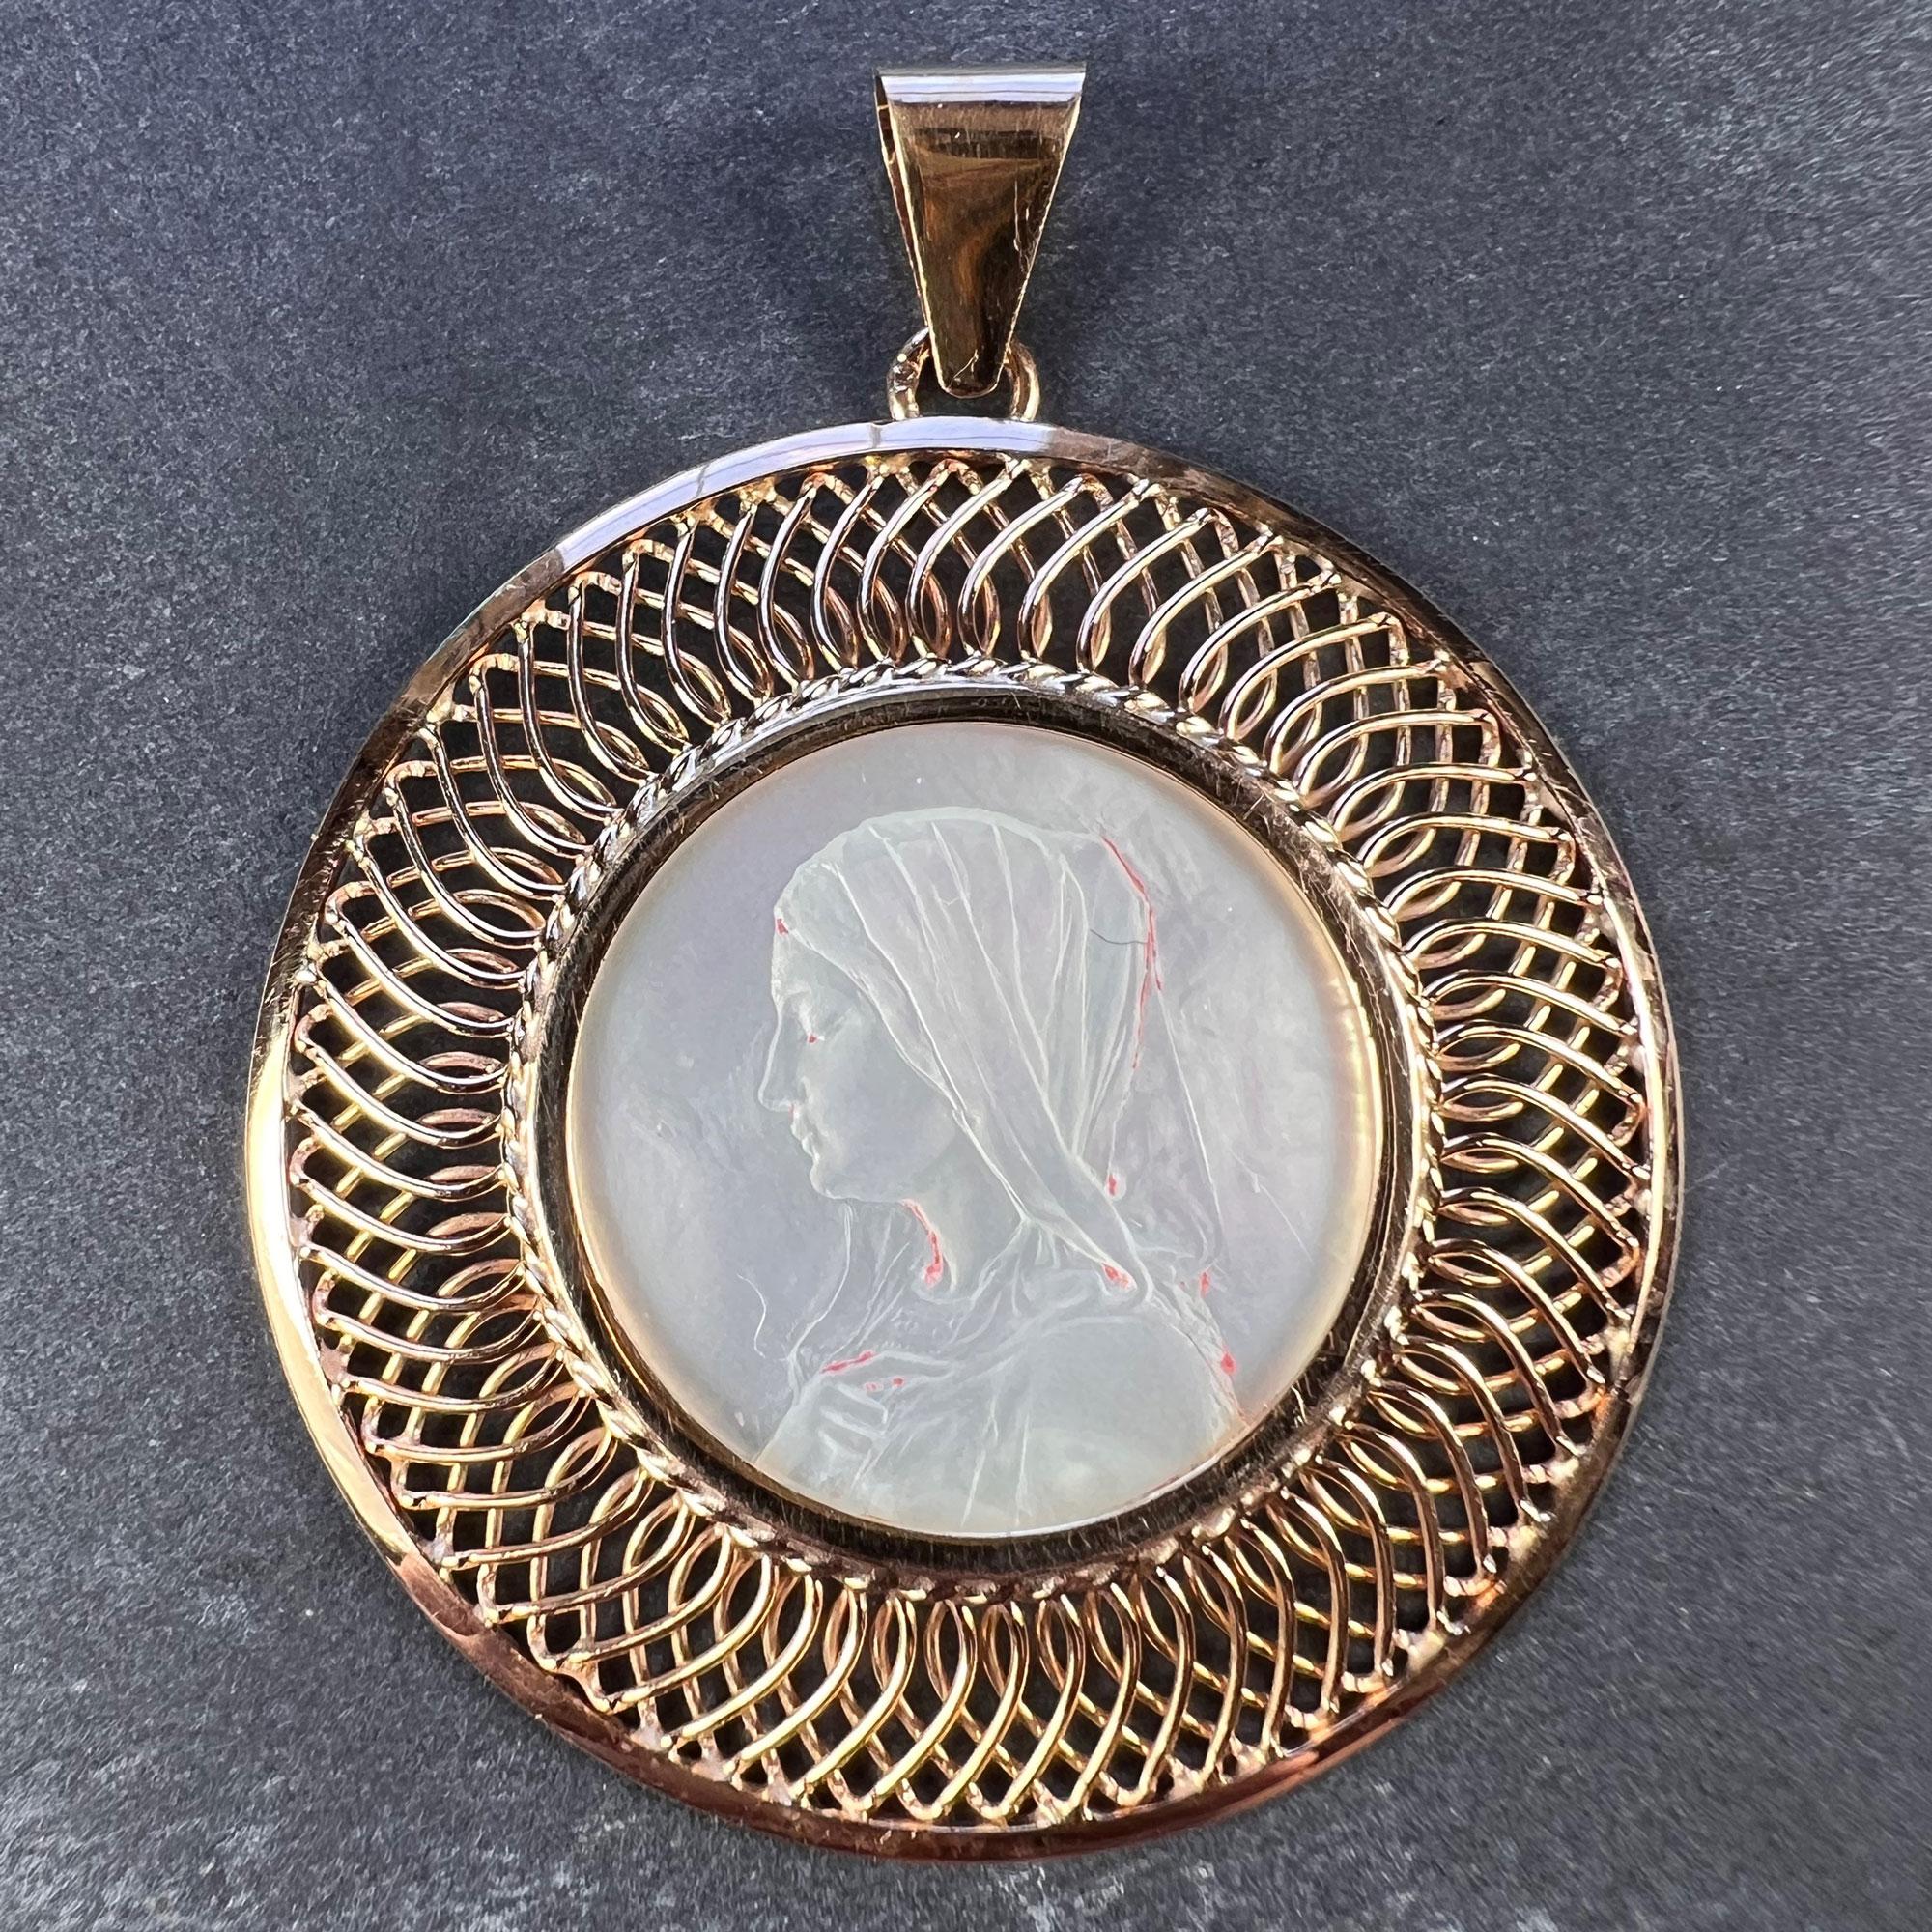 A French 18 karat (18K) rose gold charm pendant designed as an oval representing the Virgin Mary as a Mother-of-Pearl cameo set in a basketwork gold wire frame. Stamped with the eagles head for French manufacture and 18 karat gold.

Dimensions: 4.1